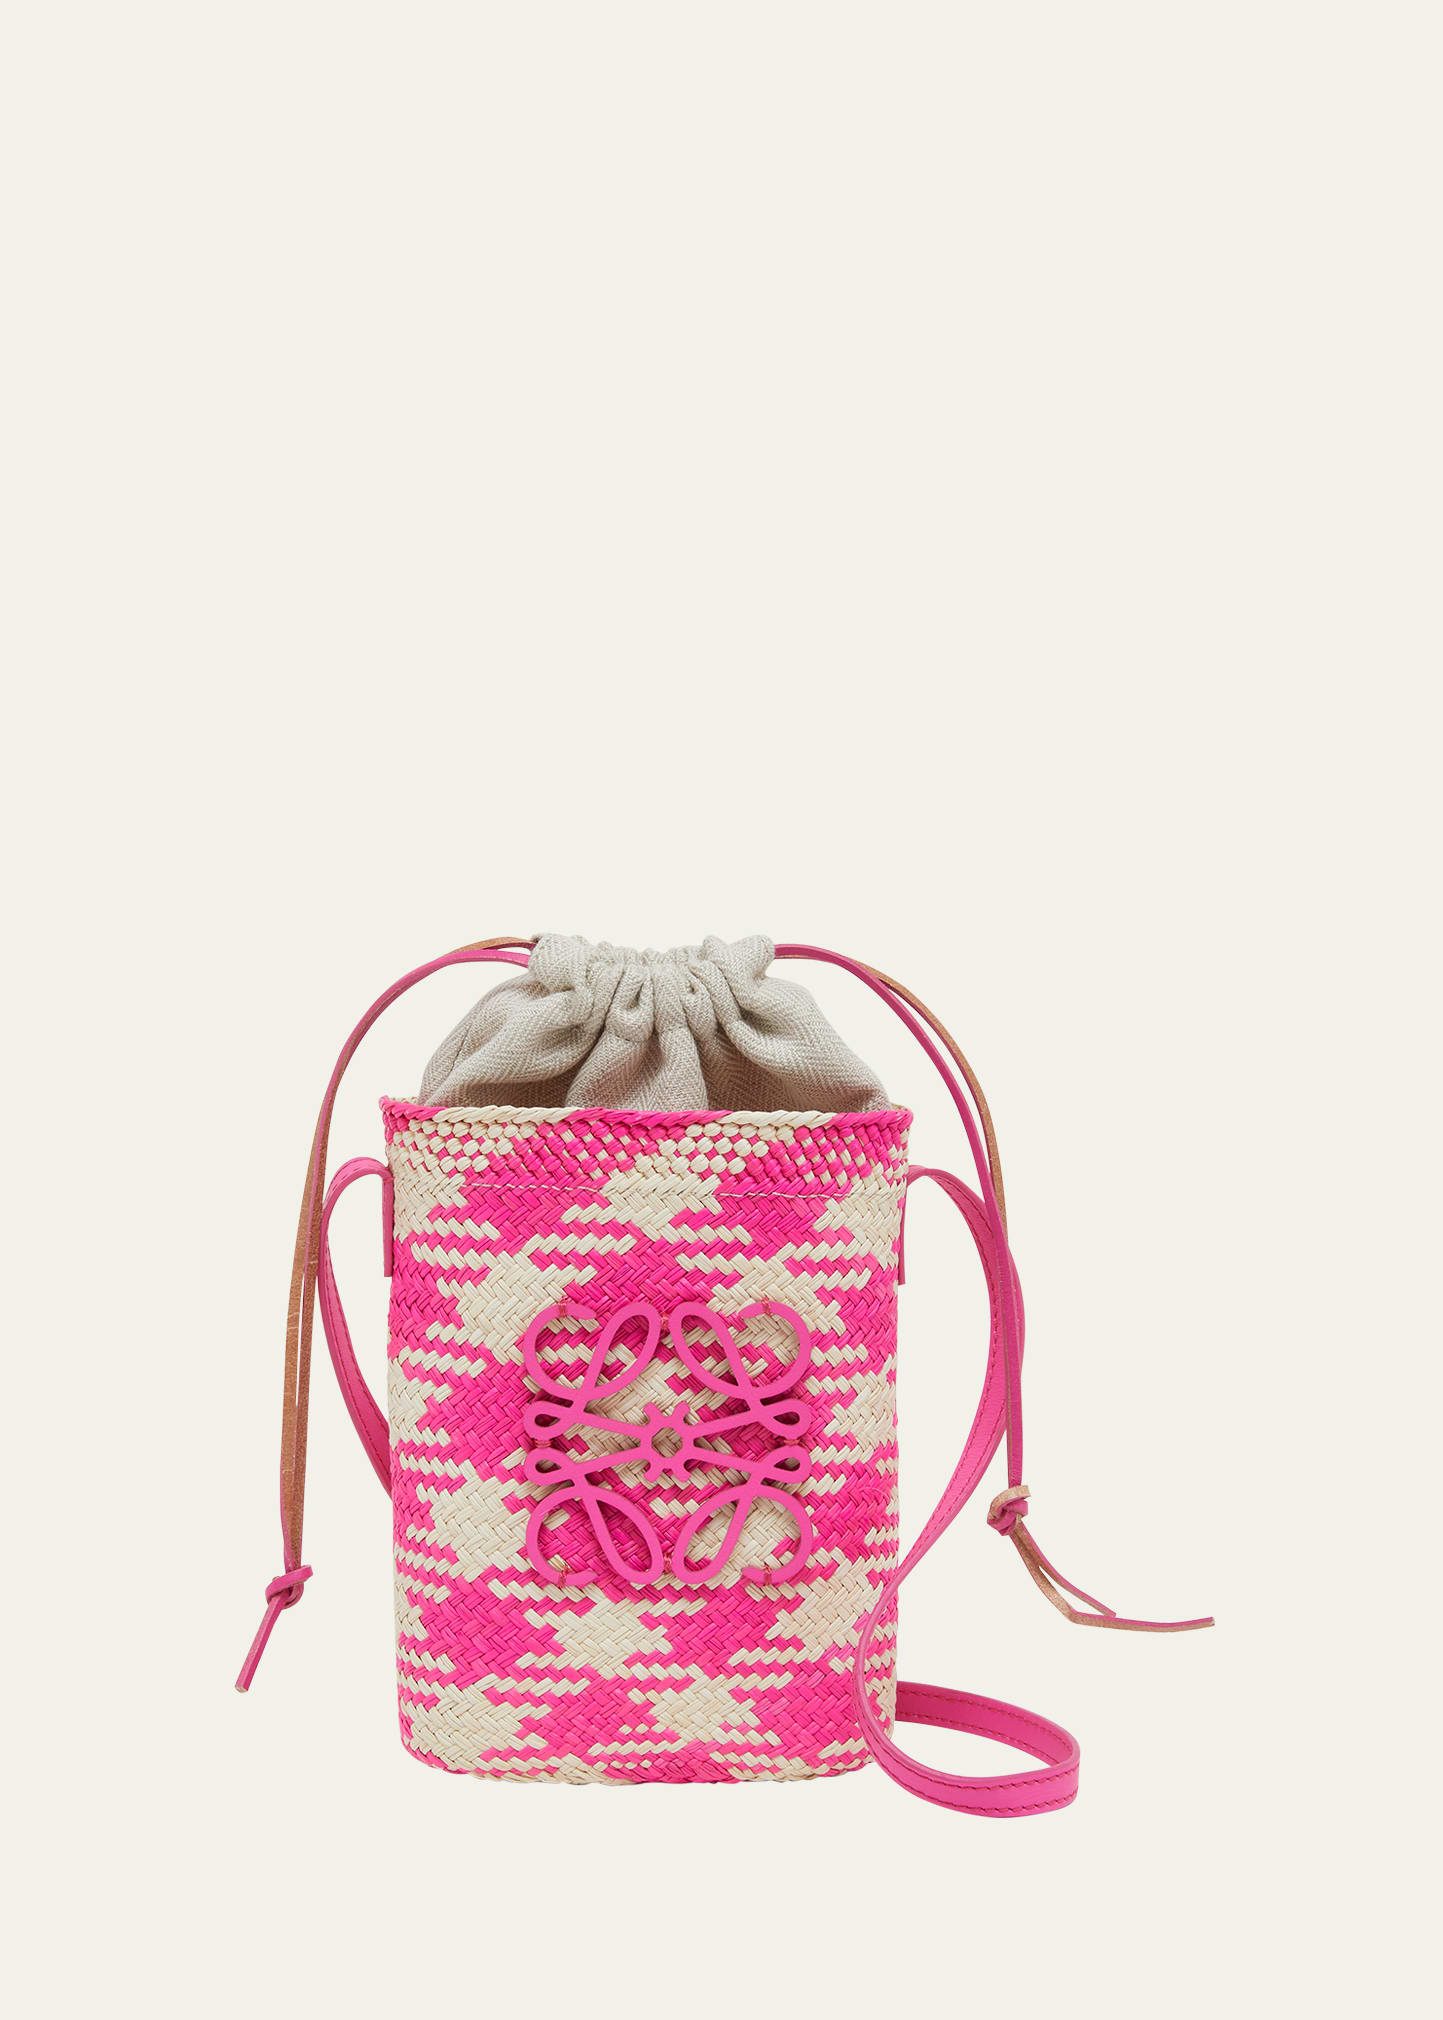 Loewe X Paula's Ibiza Iraca Pocket In Checkered Iraca Palm With Leather Strap In Natural/fuchsia